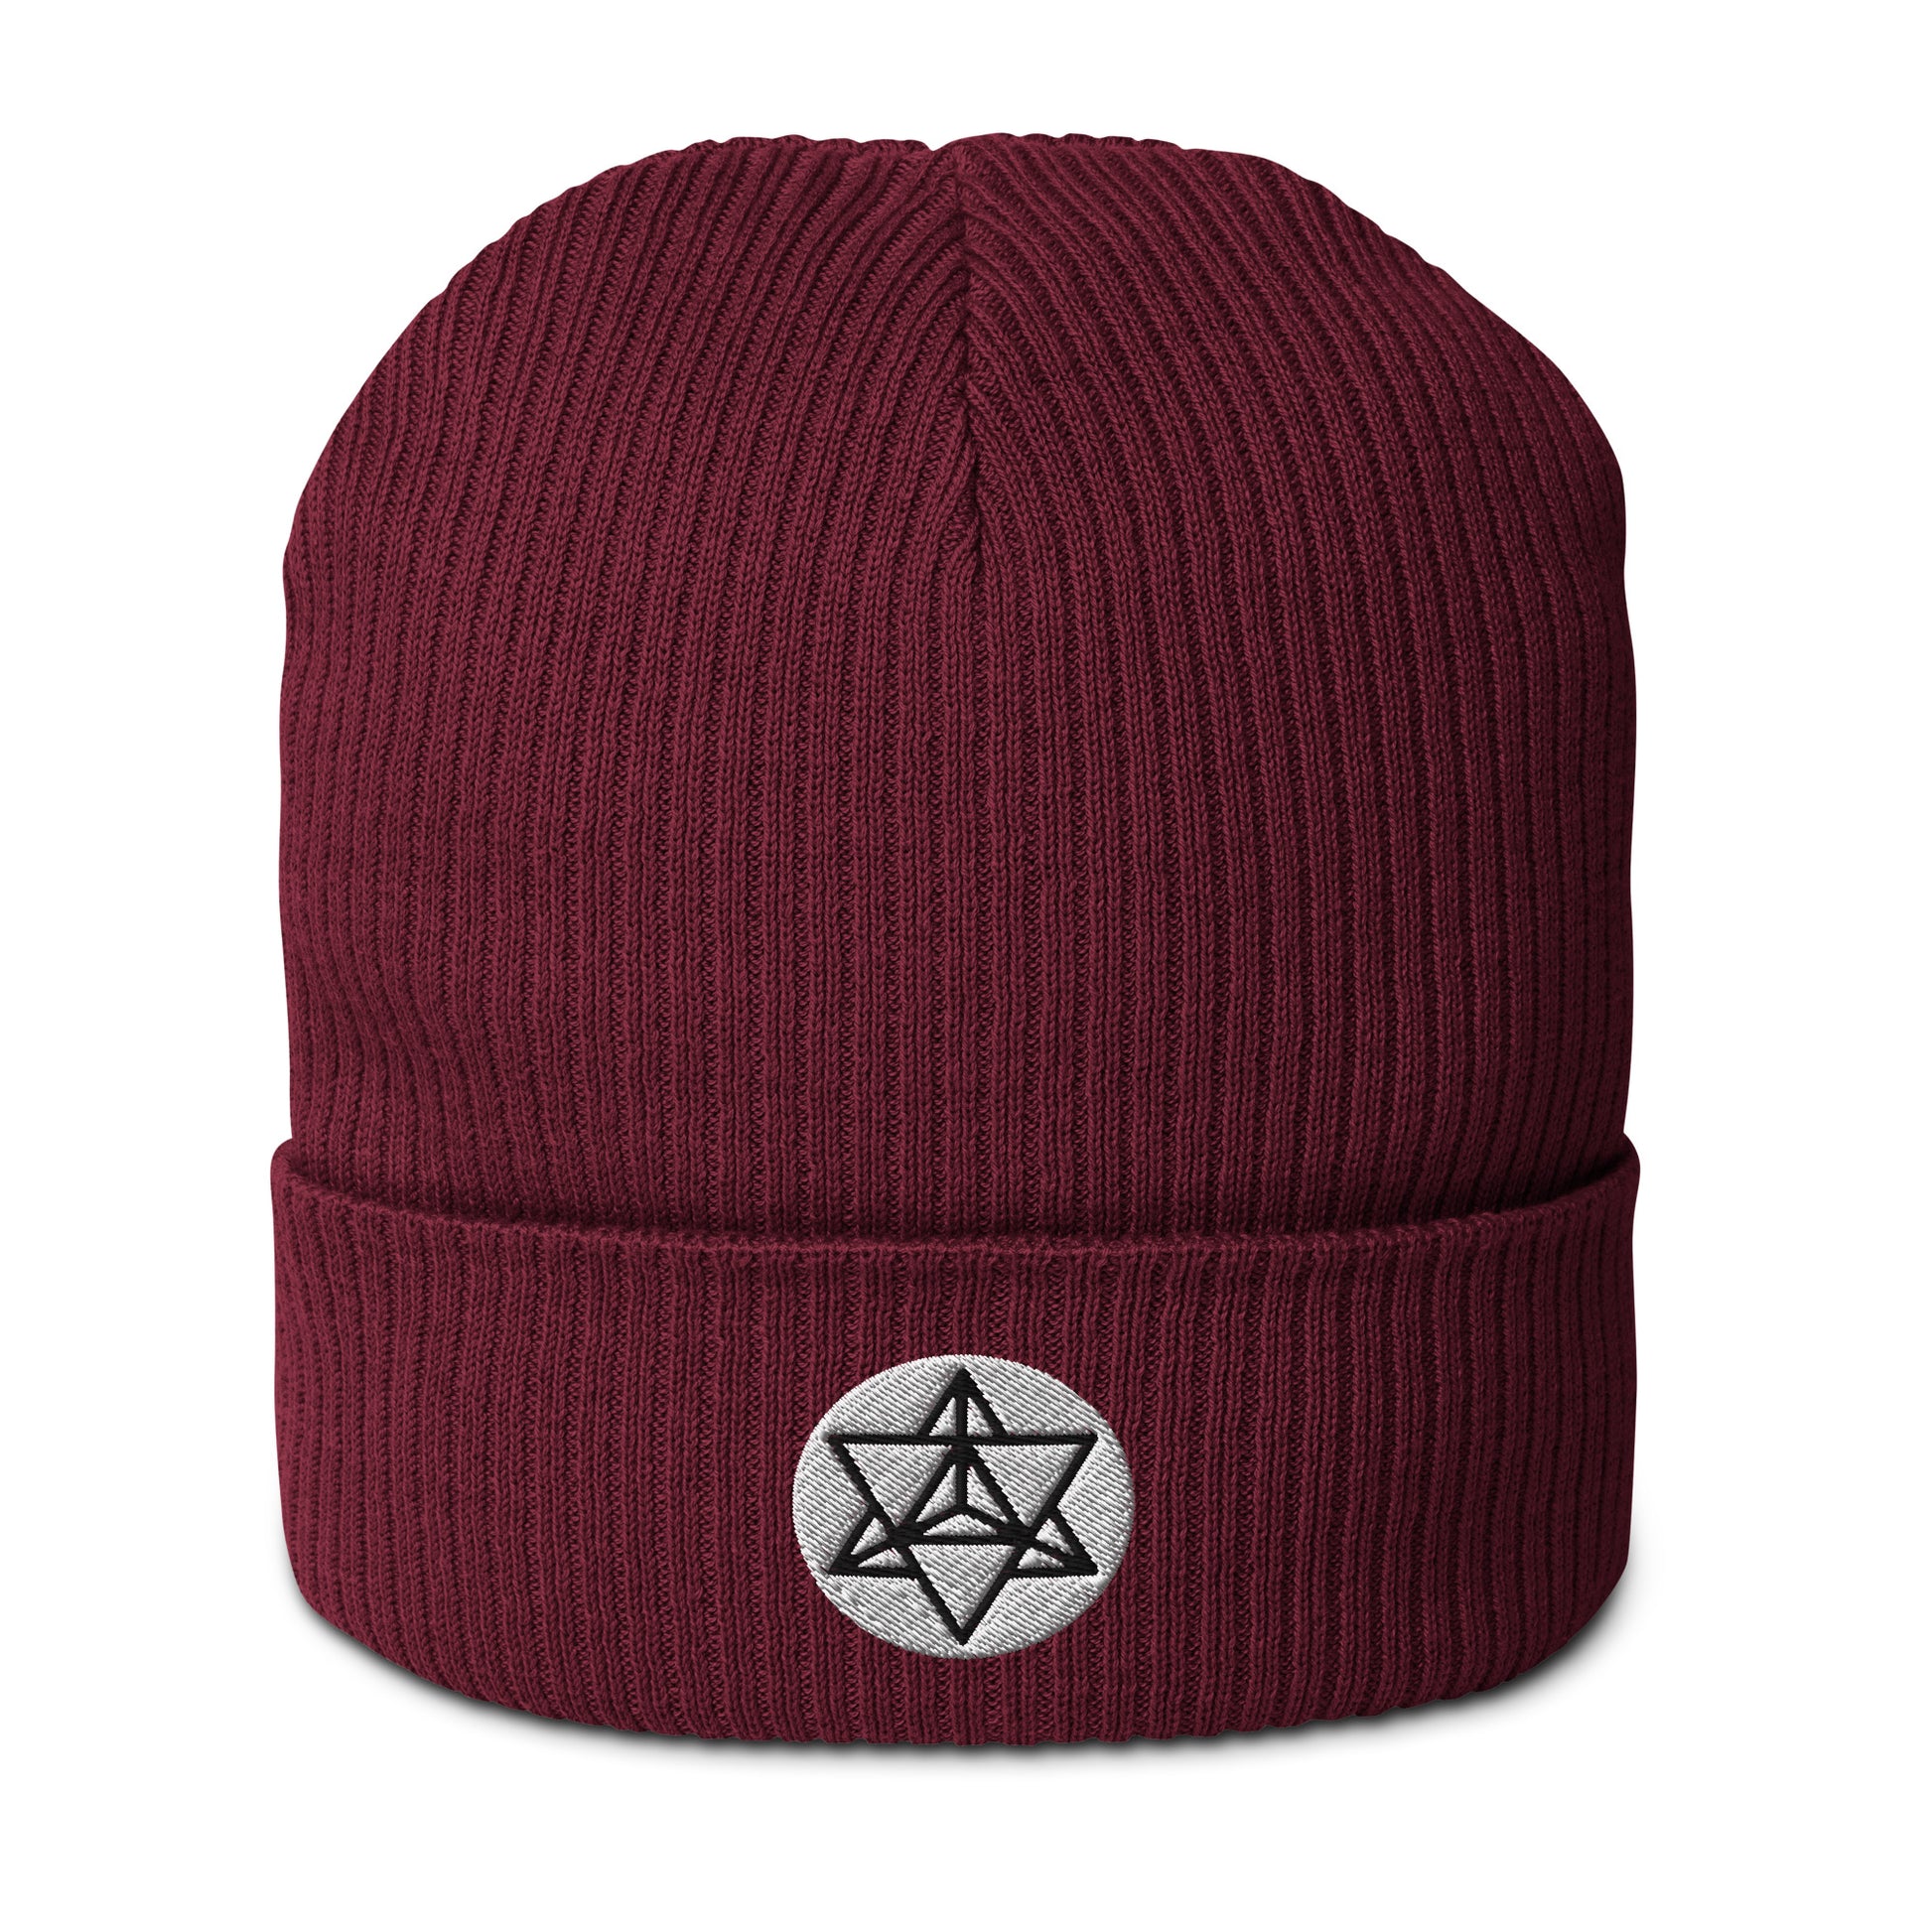 The Merkaba symbol beanie hat in Wine Red, crafted from organic cotton and adorned with intricate embroidery. Symbolizing the journey of ascension and divine protection, the Merkaba represents profound spiritual transformation and unity of mind, body, and spirit. 